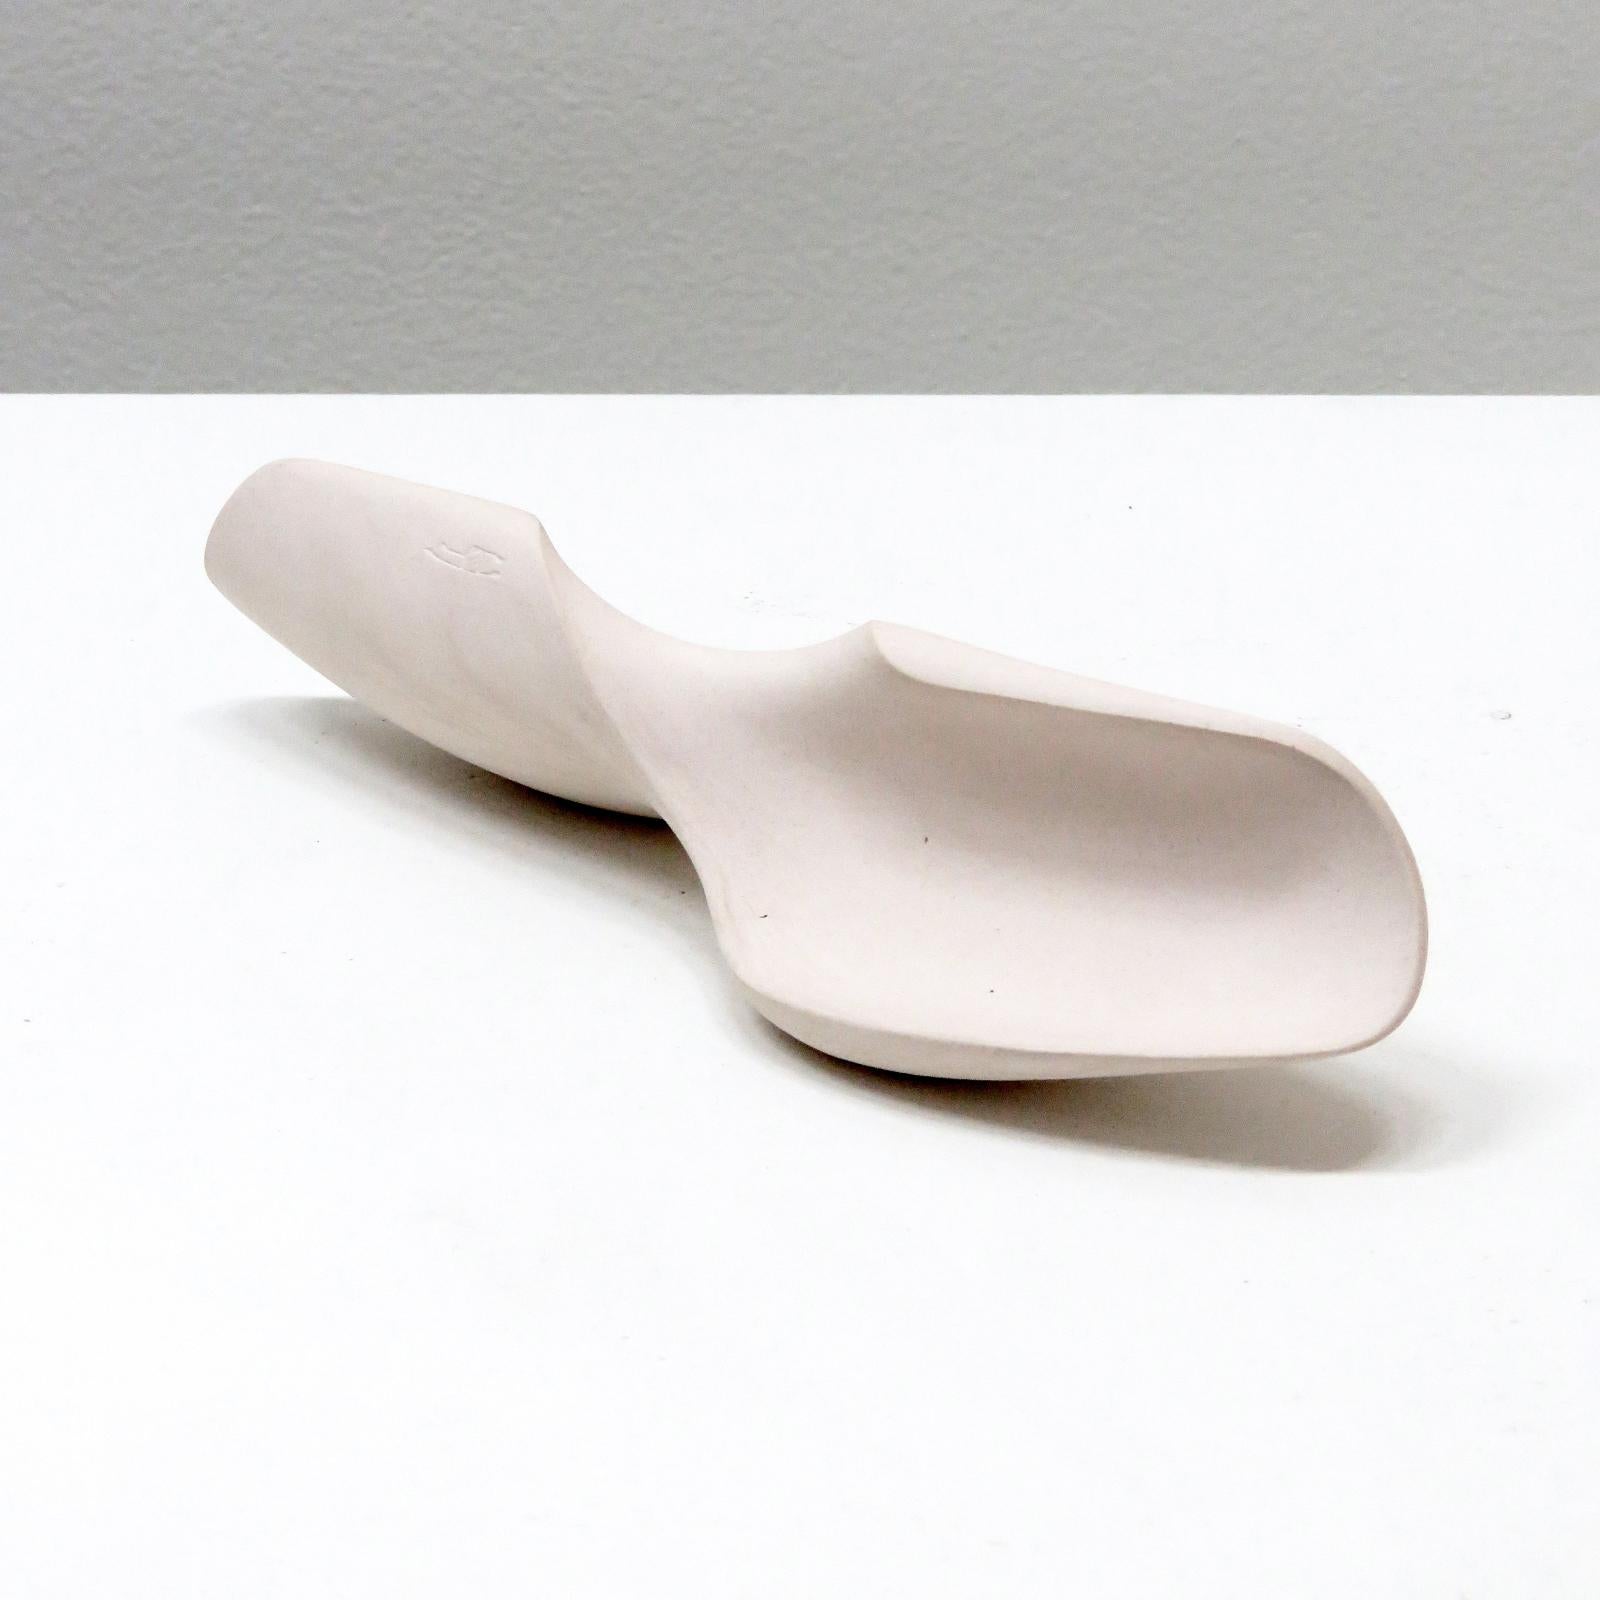 Organic Modern Sculptural Palmstone 'Propeller' by Jed Farlow  For Sale